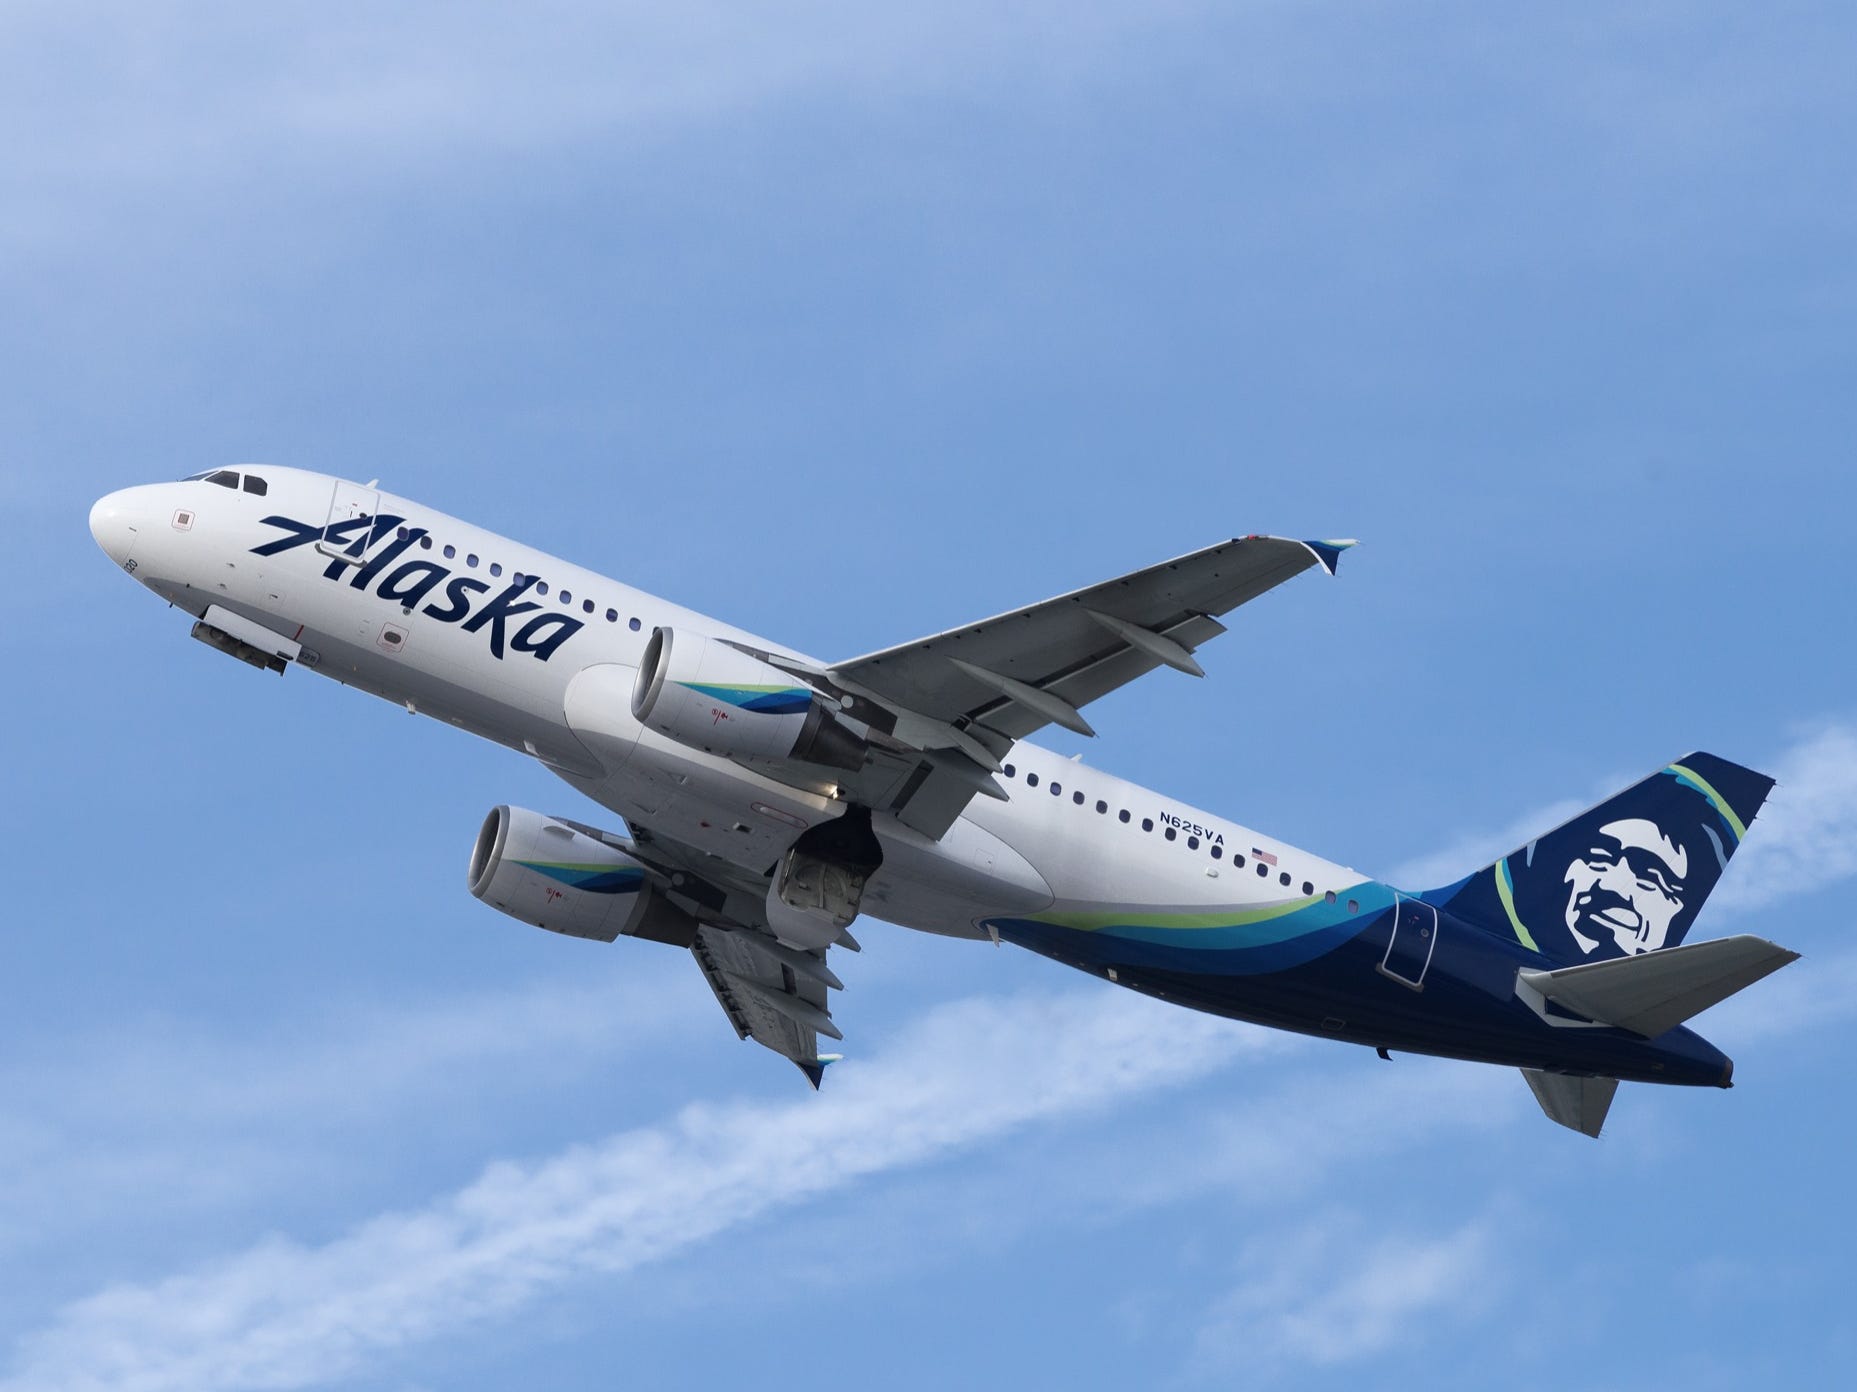 Alaska Airlines Airbus A320